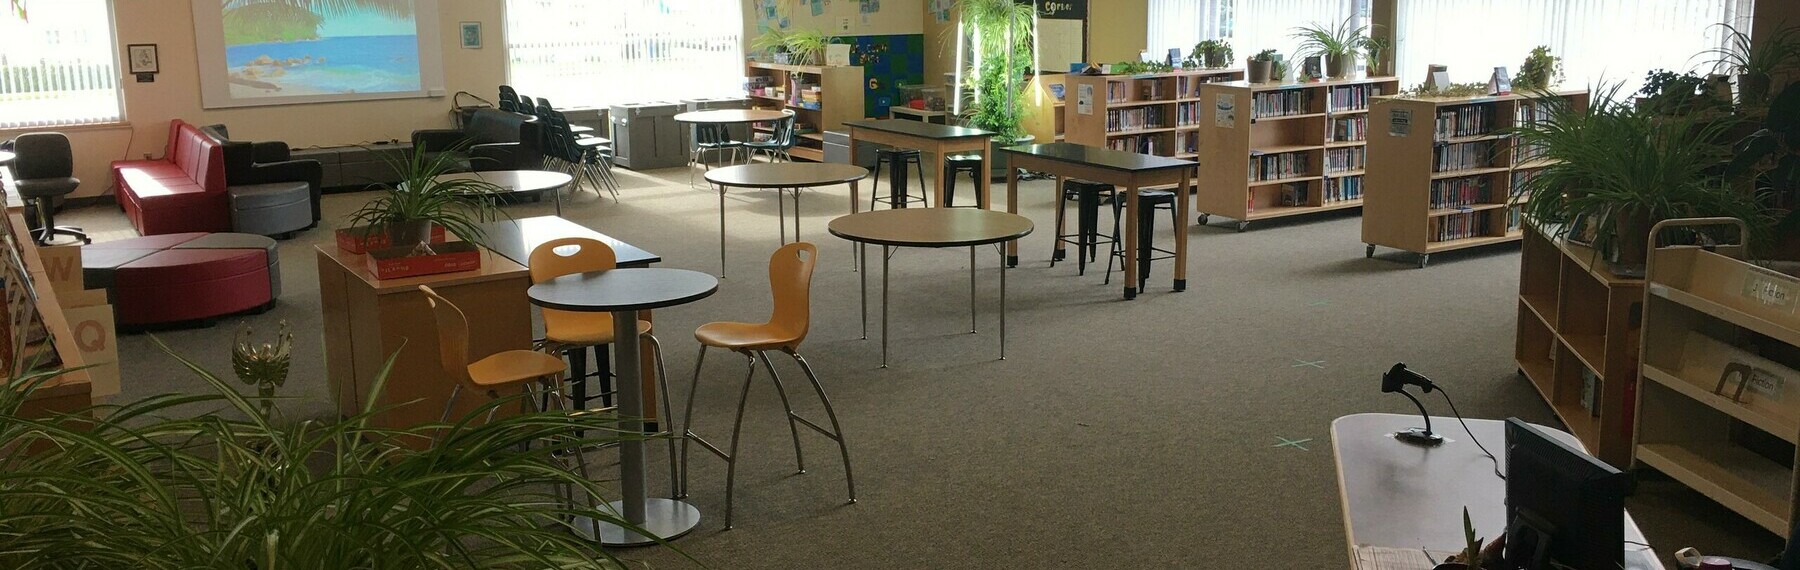 Our library/ learning commons space